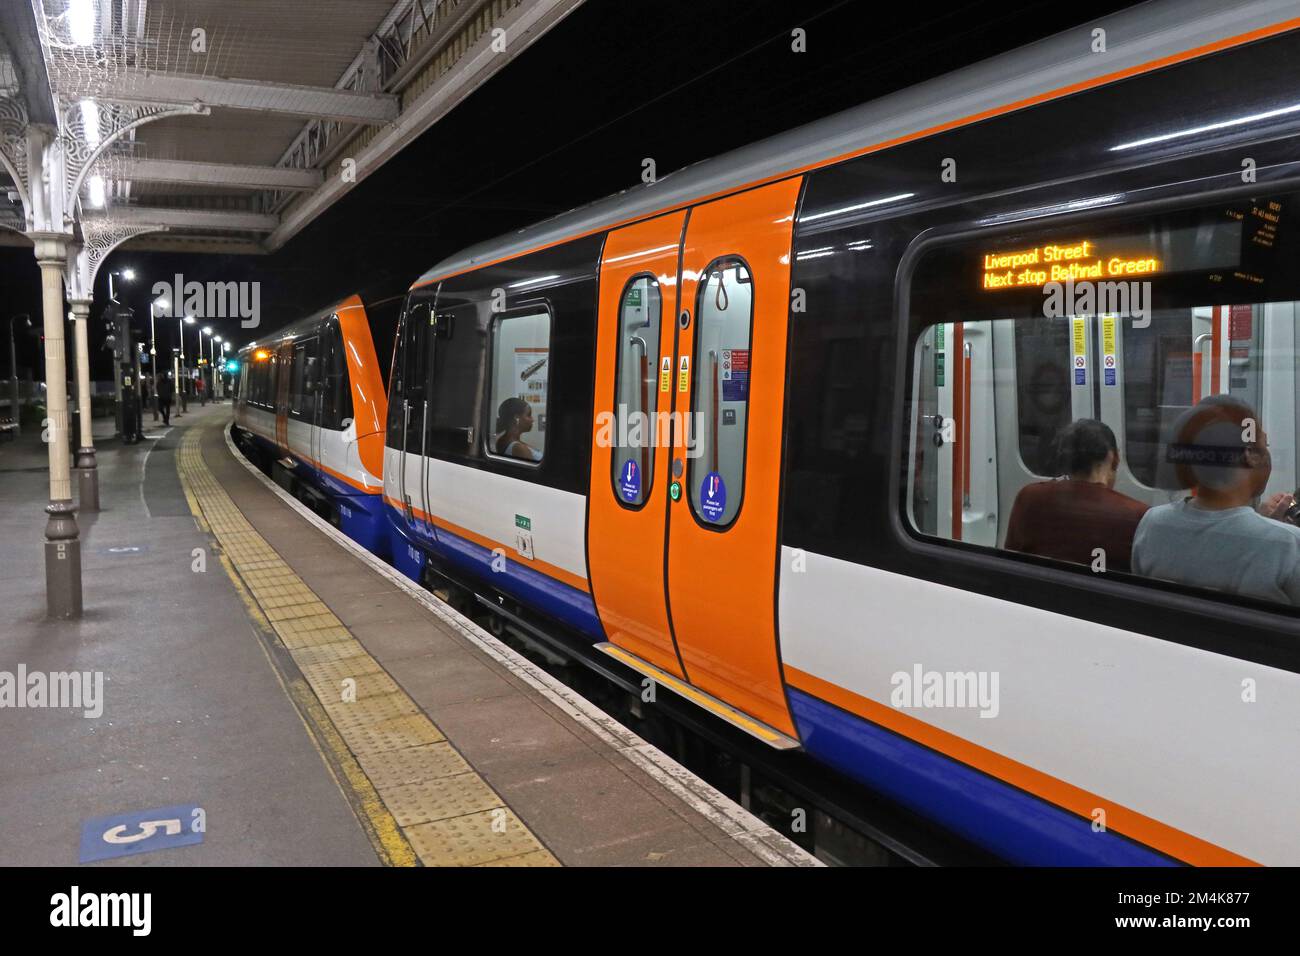 London Overground train at night, to Liverpool St via Bethnal Green Stock Photo